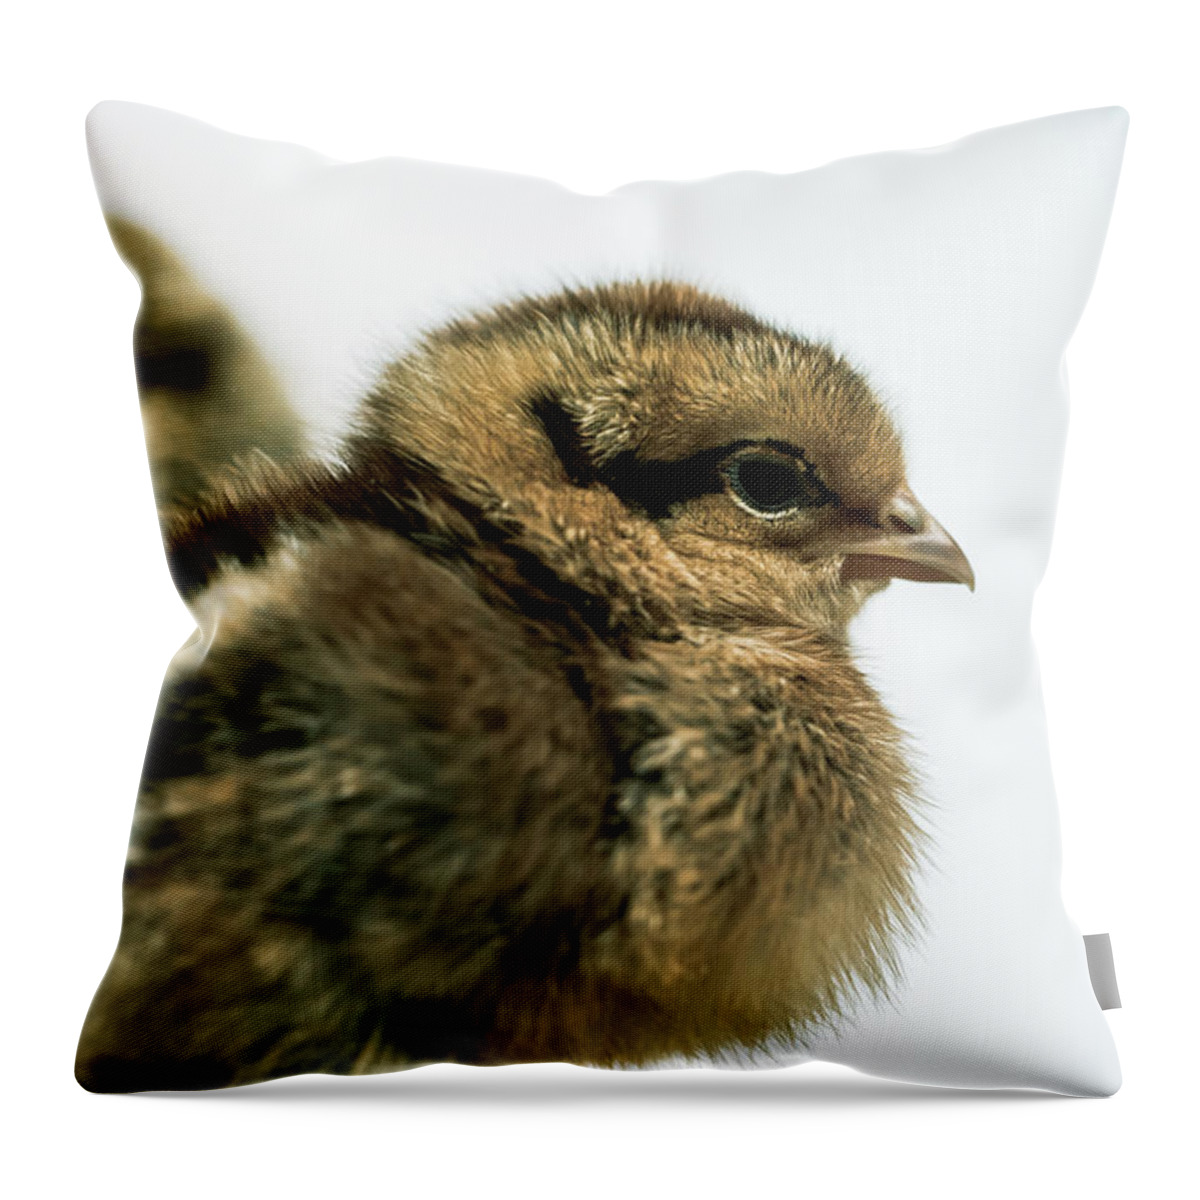 Chicks Throw Pillow featuring the photograph Fluffy Baby Chicks by Ada Weyland